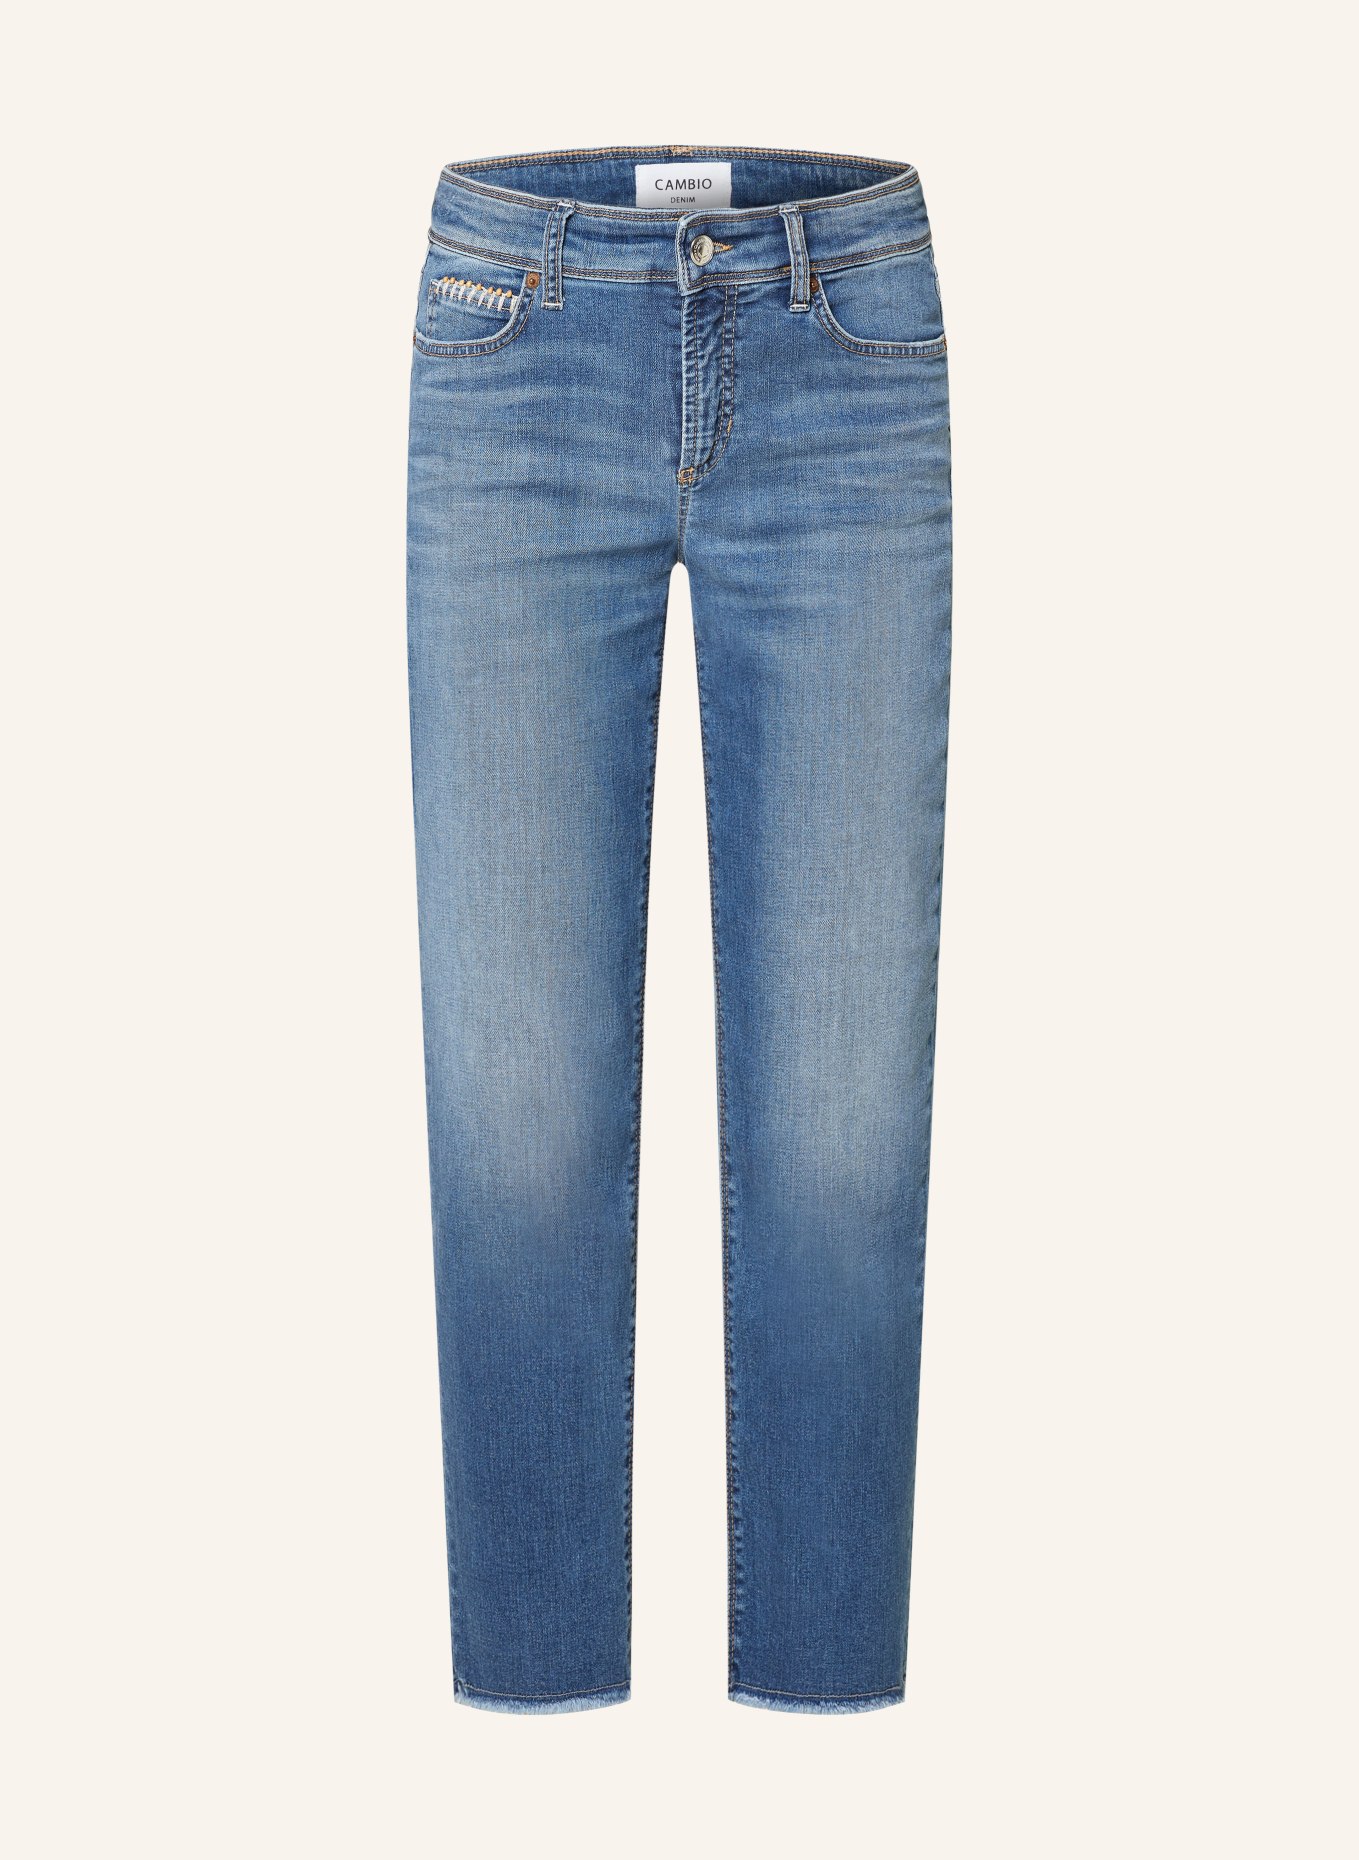 CAMBIO 7/8 jeans PIPER, Color: 5355 summer nights fringed (Image 1)